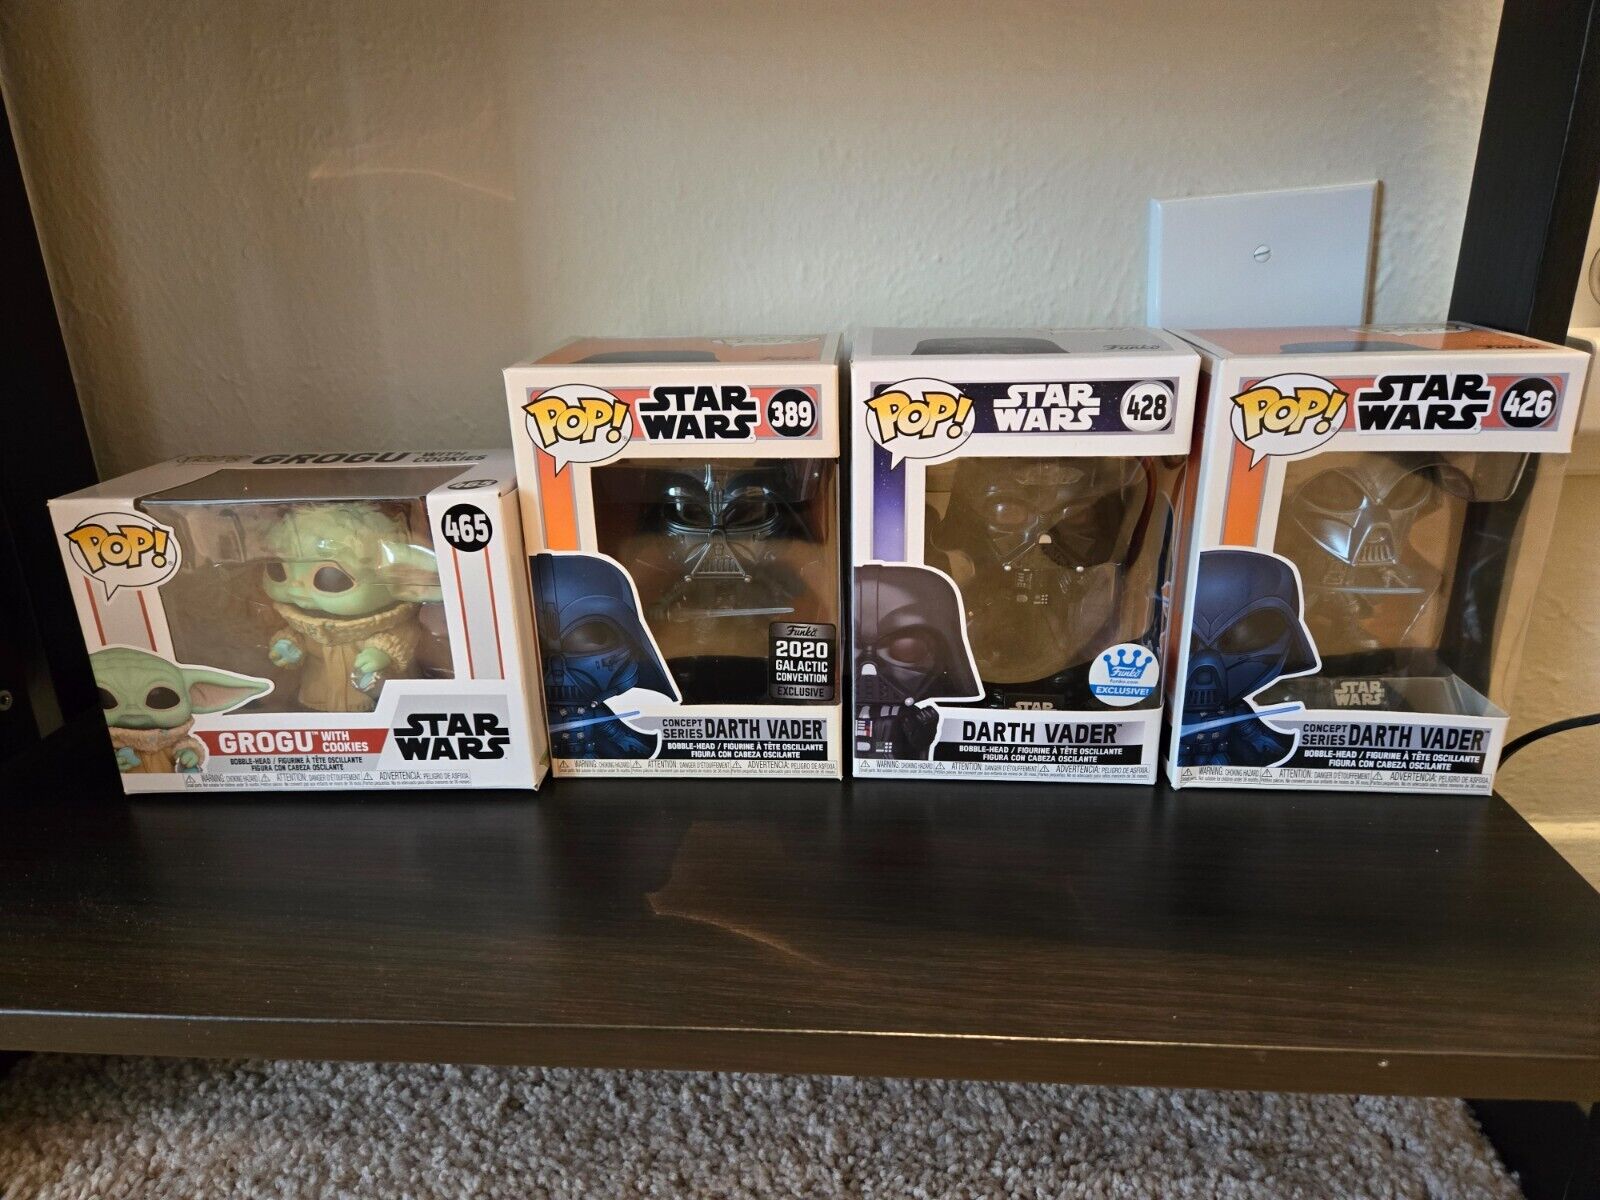 Star Wars Funko Pop Lot of 4 - Darth Vader variants and Grogu with Cookie